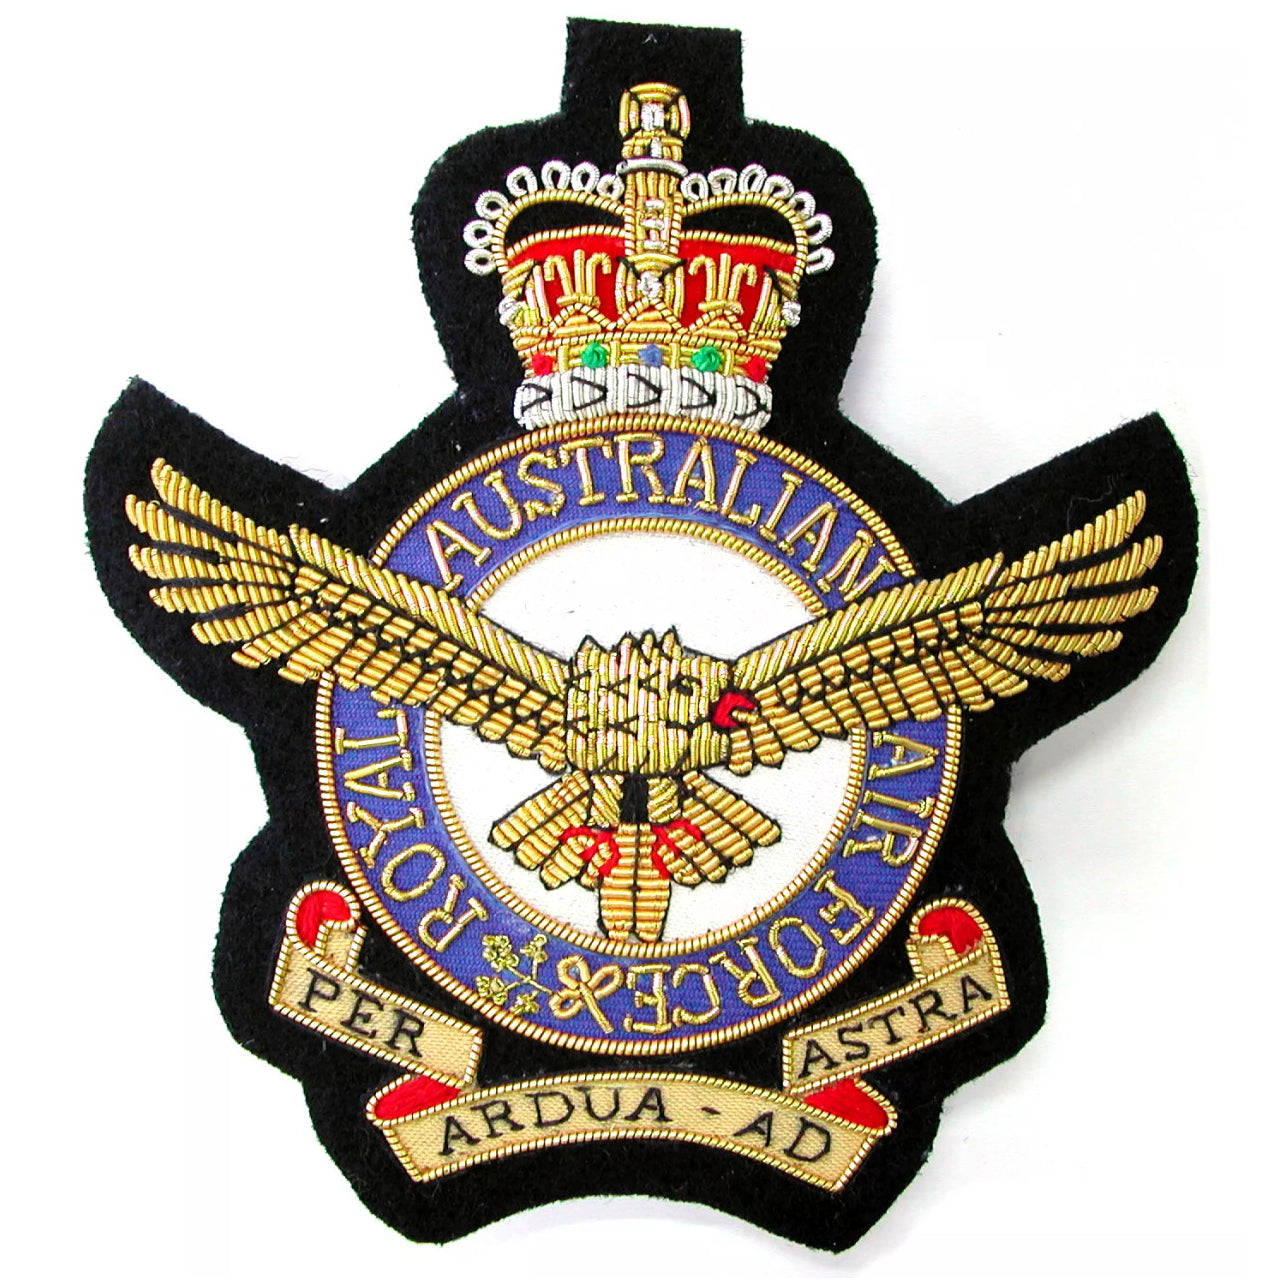 Exquisite Air Force Bullion Pocket Badge ideal to accessorize your Blazer, bag or any place you seek a fashionable badge. Approximately 80x80mm. Fastens firmly with 3 butterfly clasps on the rear. You'll love your new stylish accessory, crafted with a timeless look that will last for years. Bright and eye-catching, this badge adds a luxurious touch to your favorite wardrobe pieces. www.moralepatches.com.au